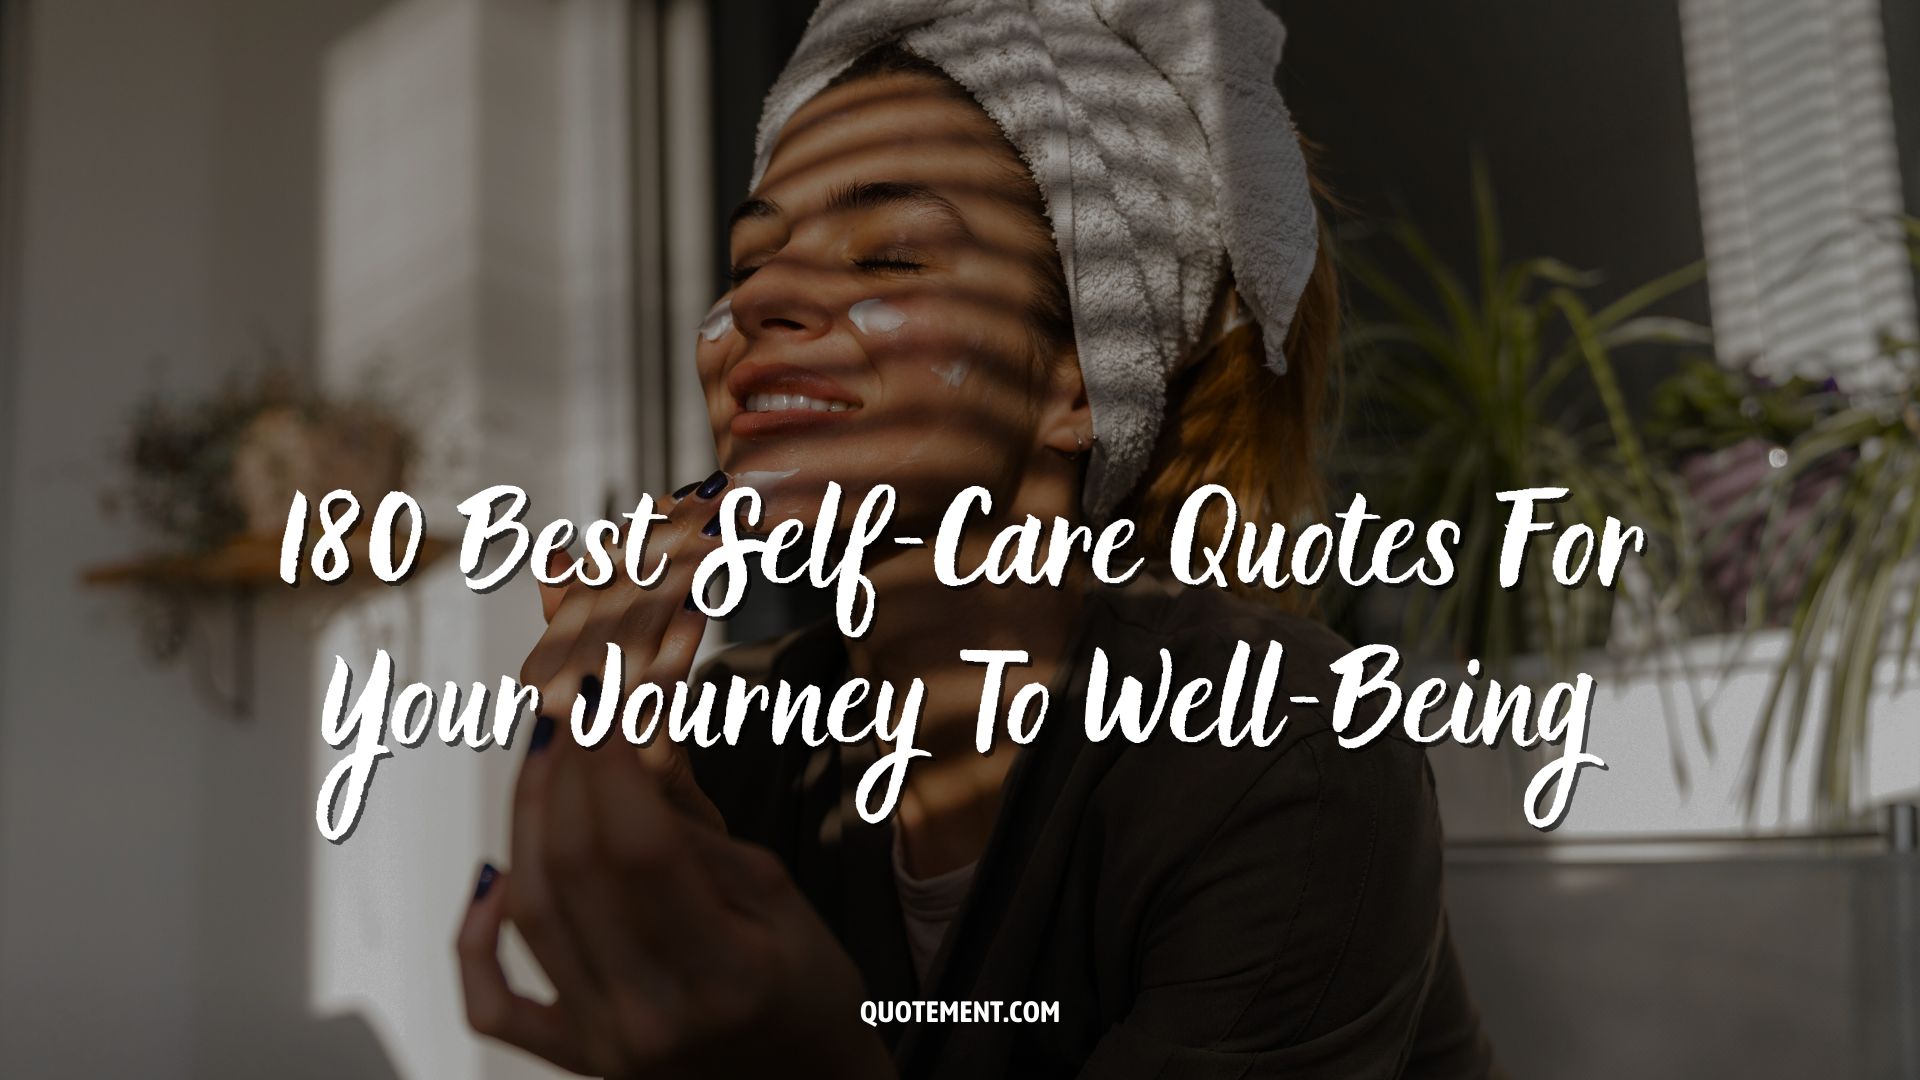 180 Best Self-Care Quotes For Your Journey To Well-Being